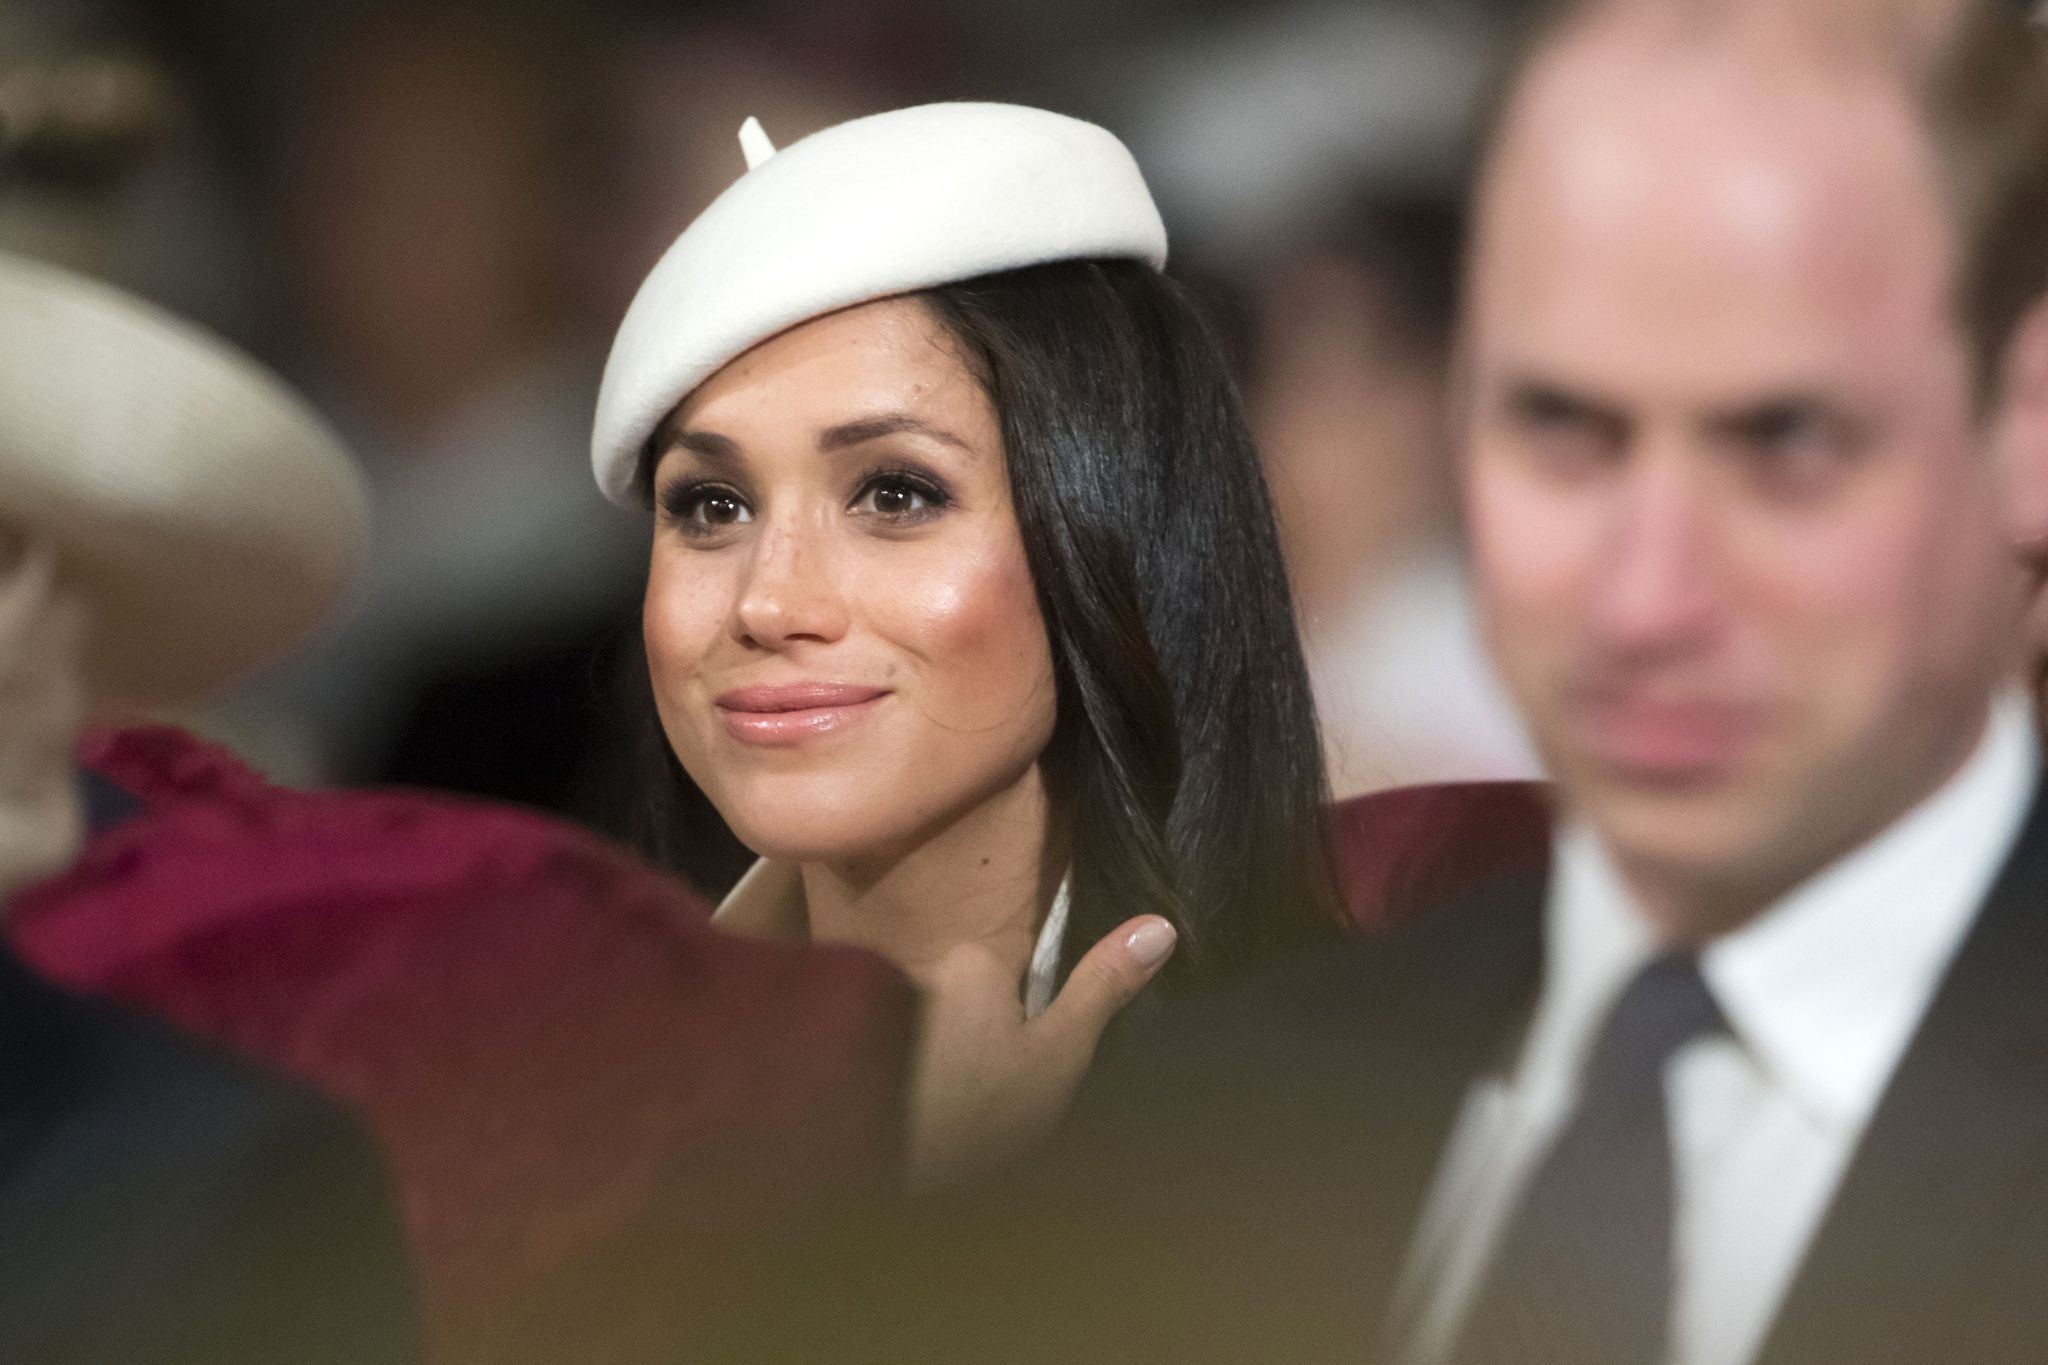 prince harrys fiancee, us actress meghan markle attends a commonwealth day service at westminster abbey in central london, on march 12, 2018
britains queen elizabeth ii has been the head of the commonwealth throughout her reign organised by the royal commonwealth society, the service is the largest annual inter faith gathering in the united kingdom  afp photo  pool  paul grover        photo credit should read paul groverafp via getty images